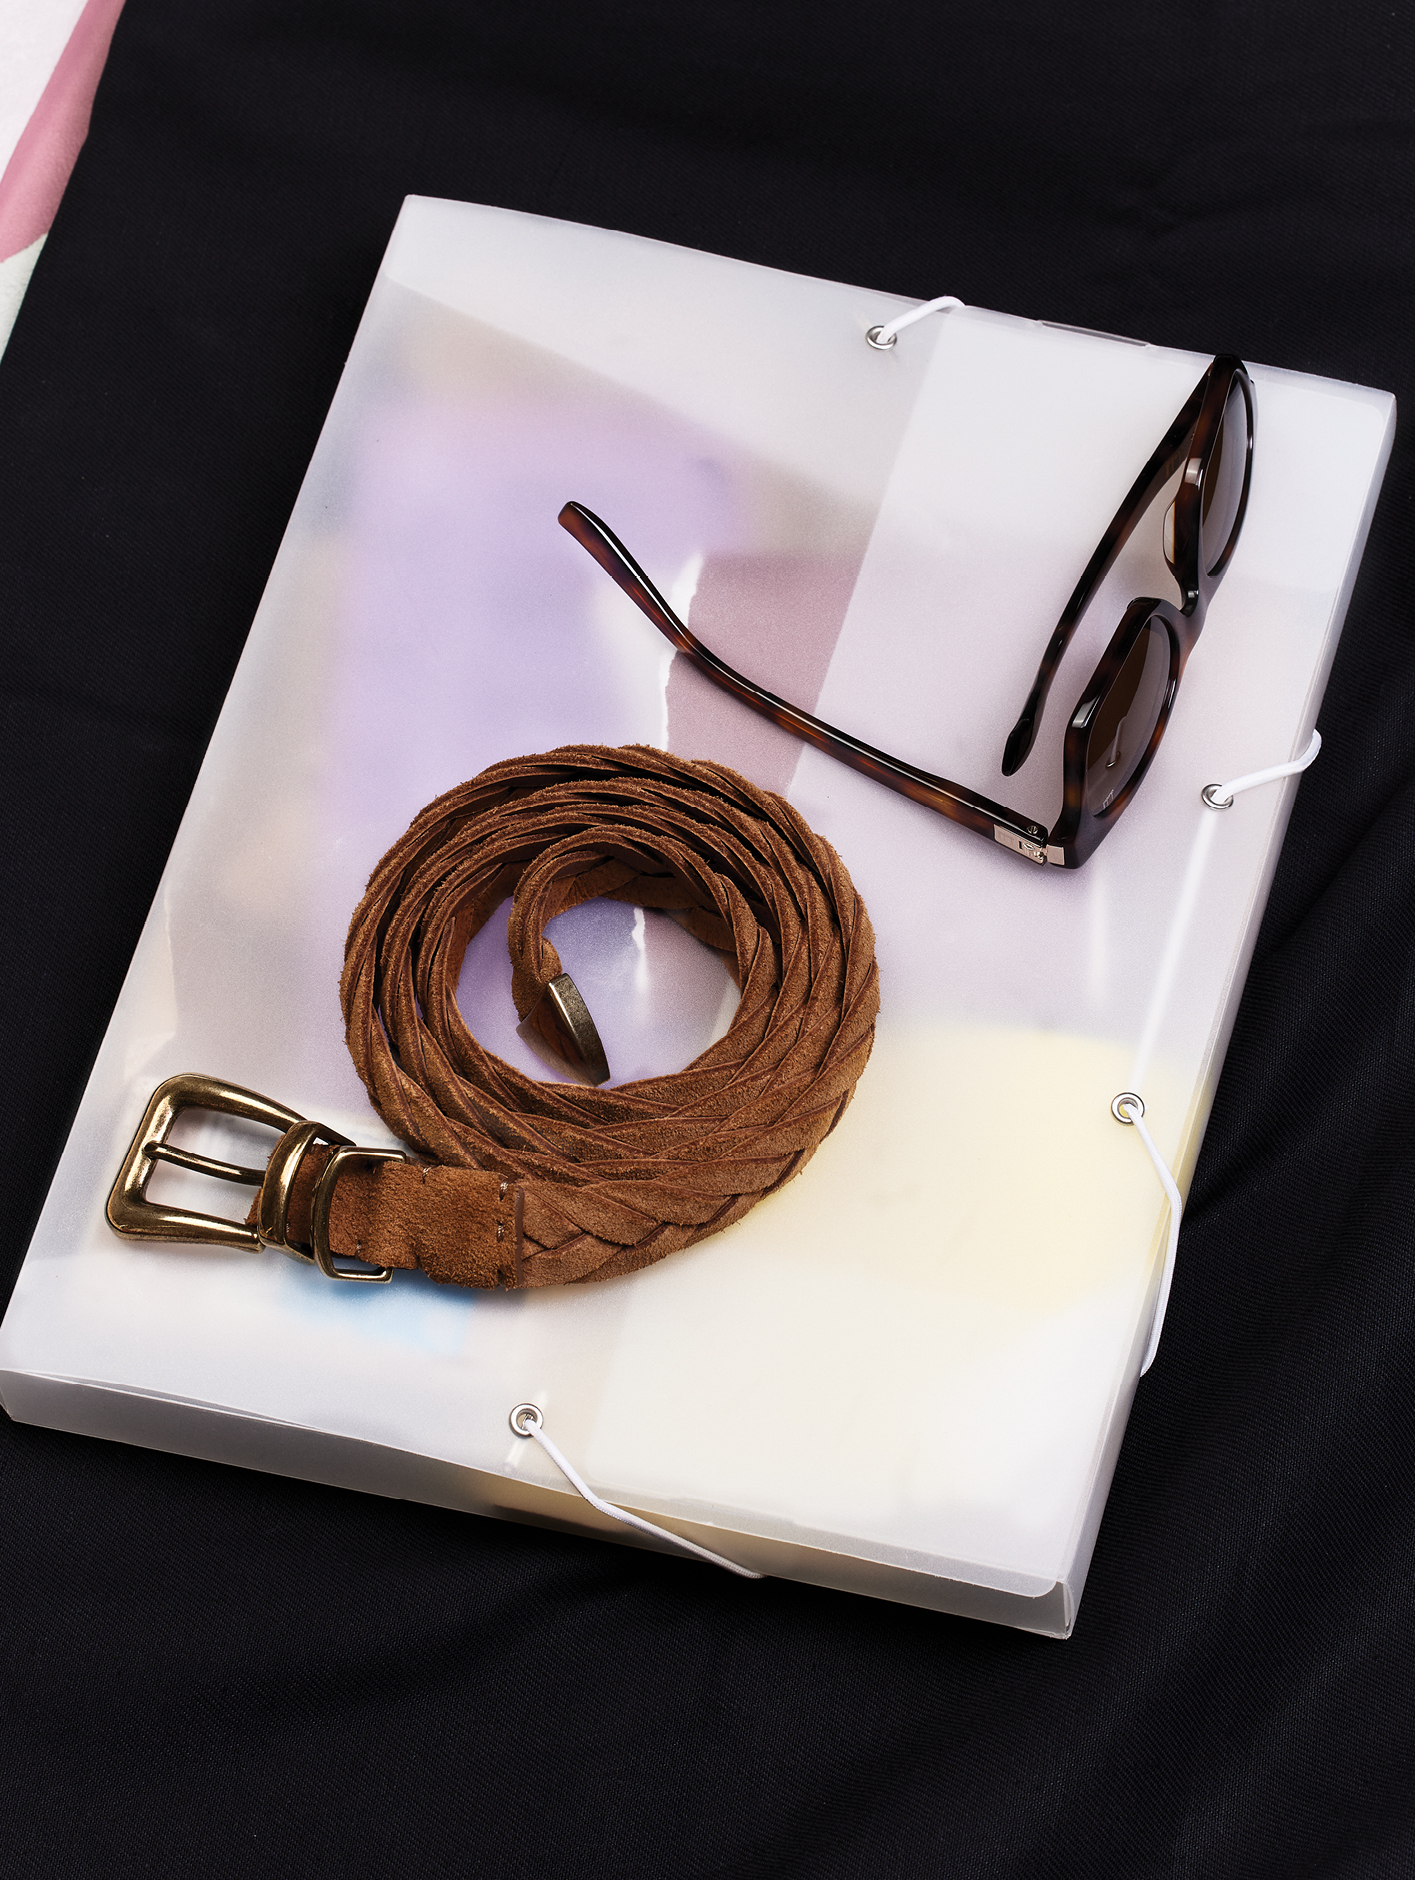 Dunhill Heritage square sunglasses and calfskin belt from Brunello Cucinelli